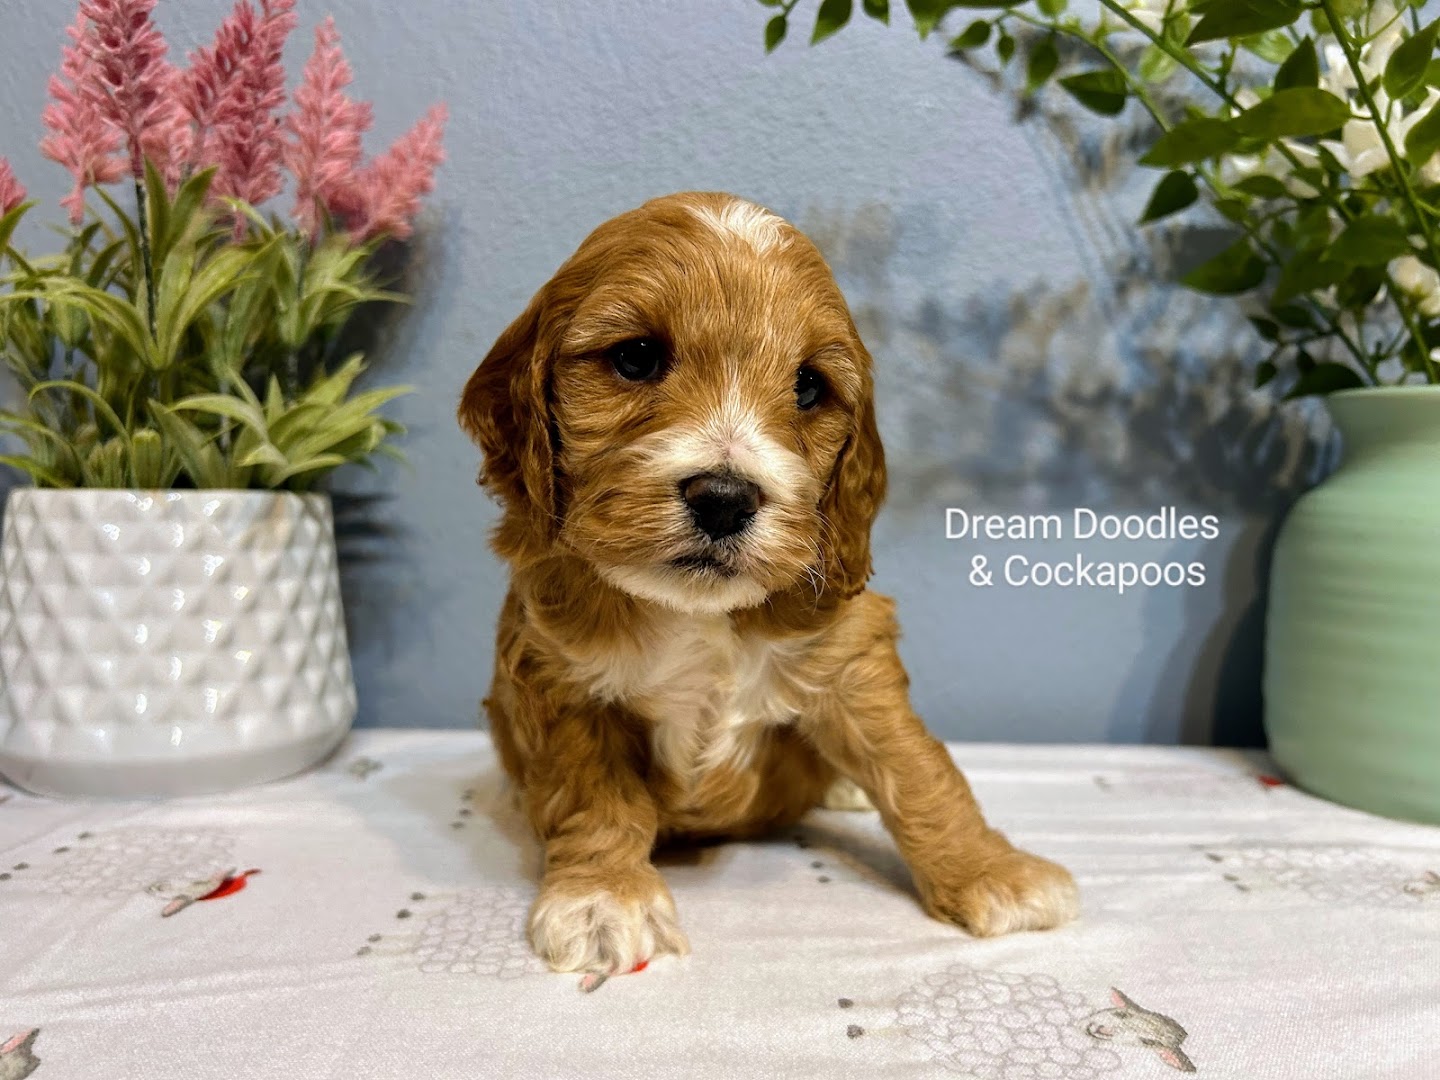 Dream Doodles and Cockapoos